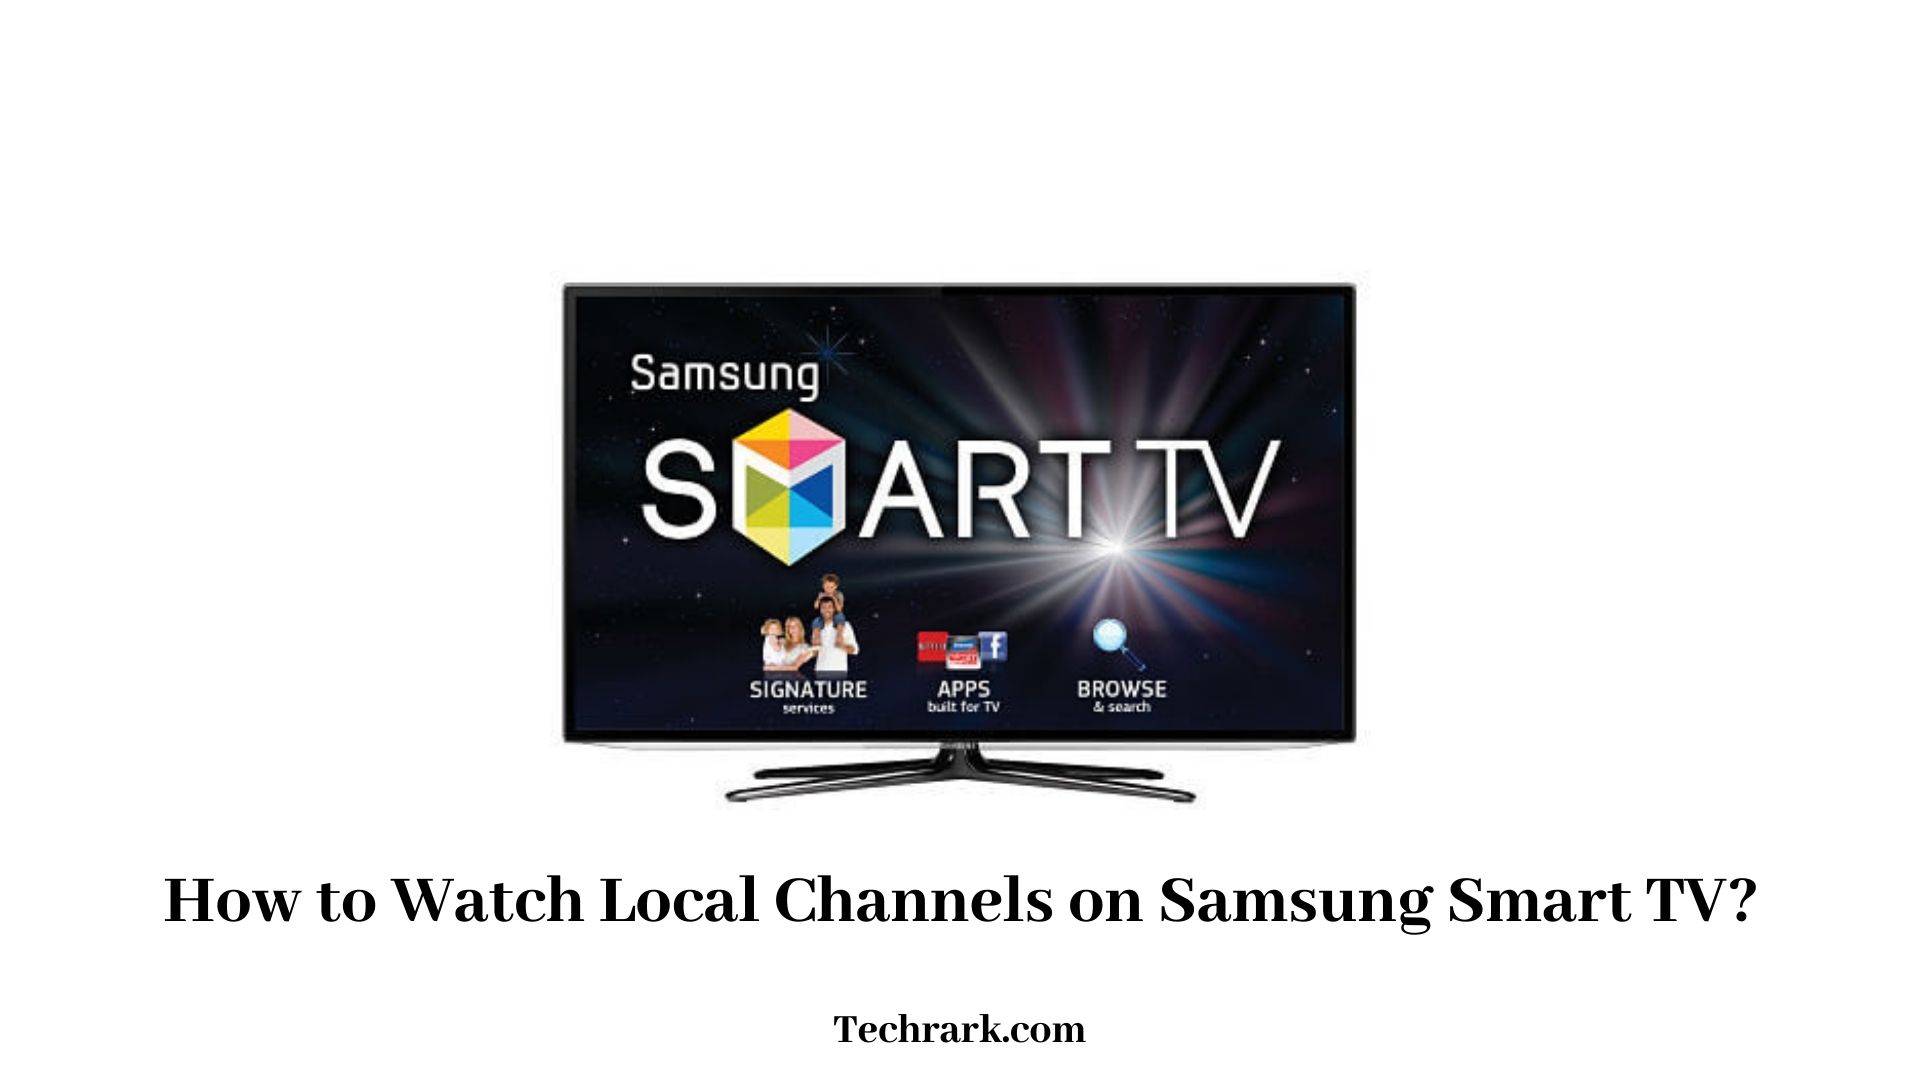 Local Channels on Samsung Smart TV